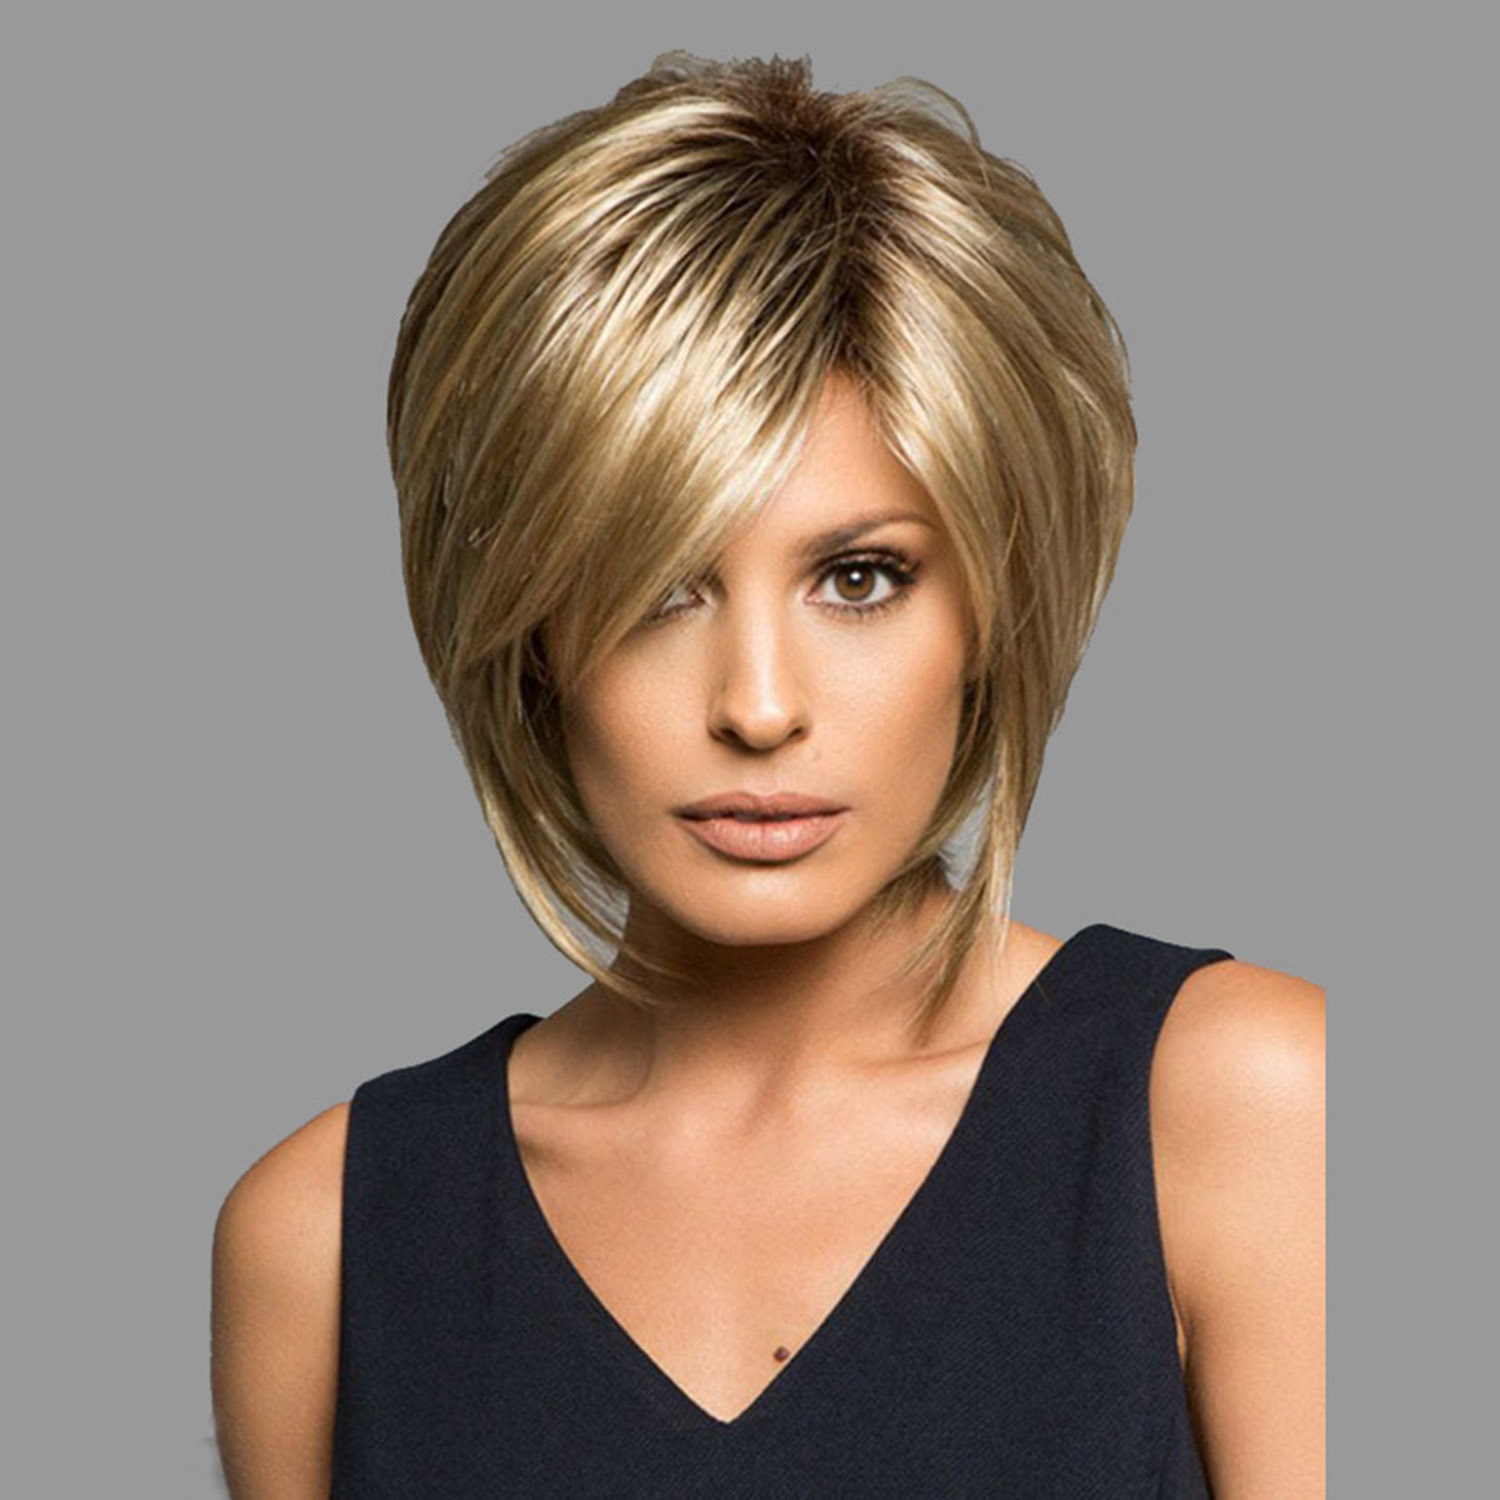 A synthetic wig styled with bangs, featuring mixed color short straight hair